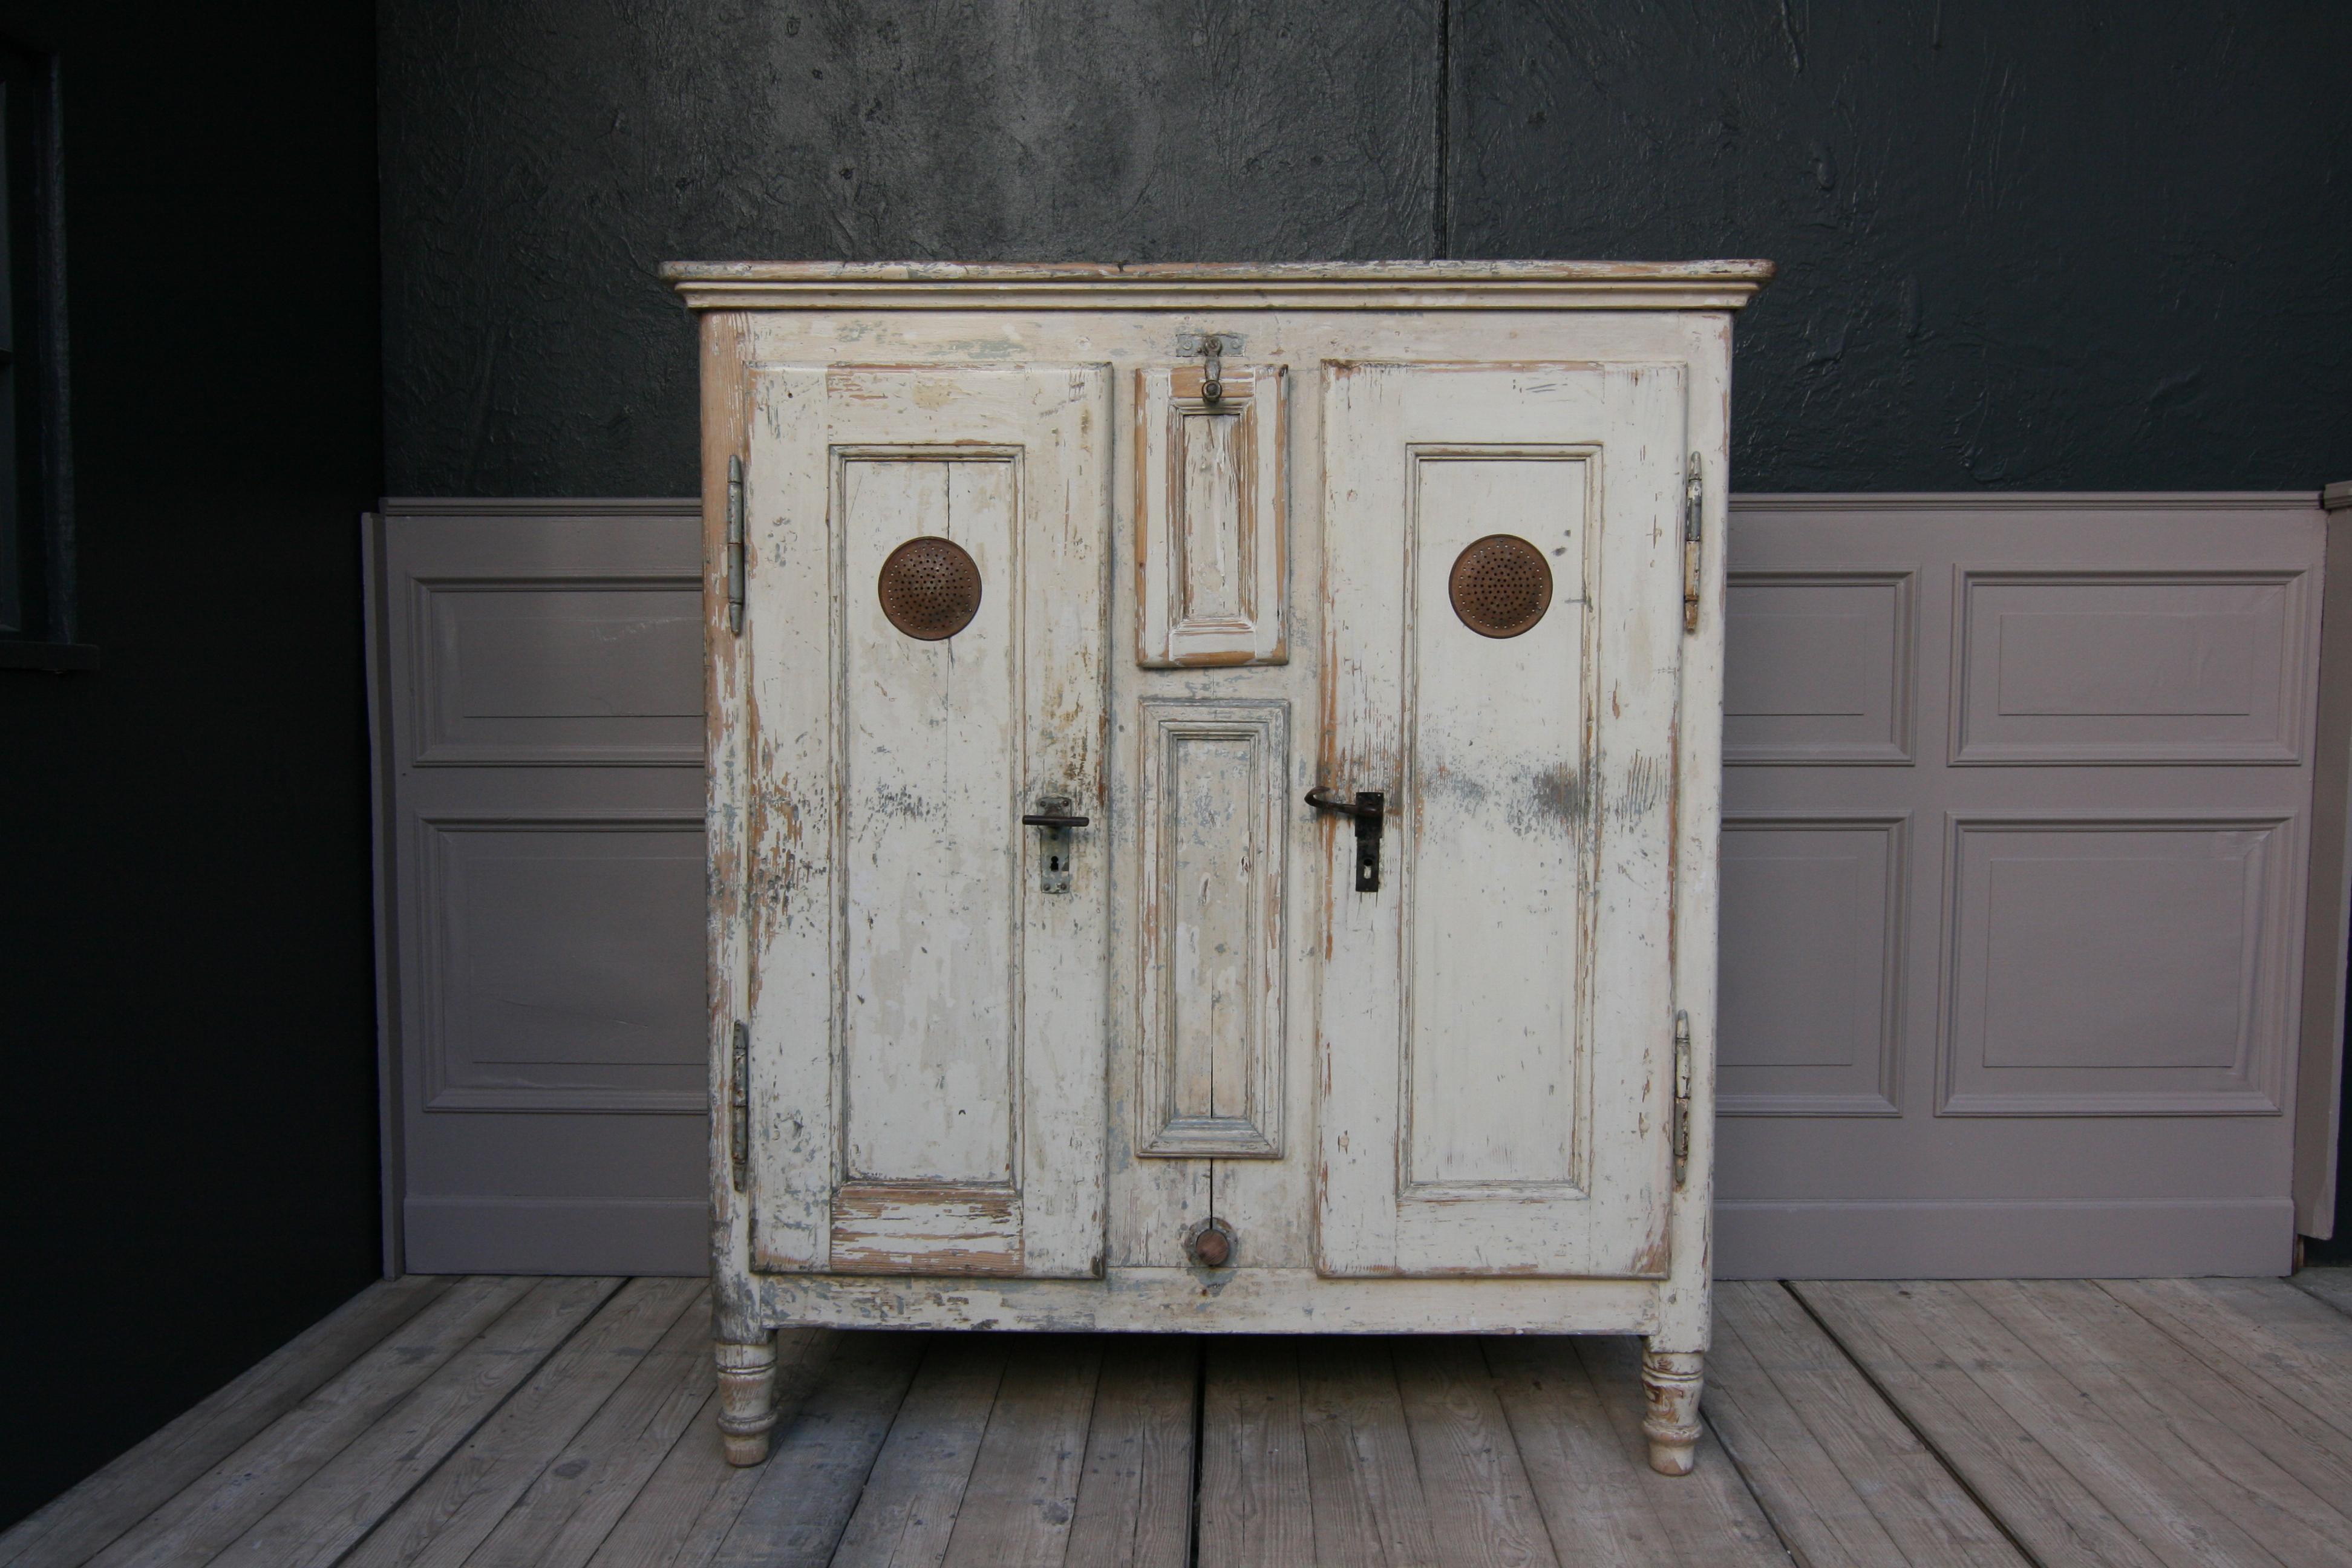 Antique refrigerator or icebox from circa 1870, in original painting, restored ready to live (newer paint layer removed, completely sanded and transparently sealed; inside completely new painted white, old ice bucket installation removed and 4 new